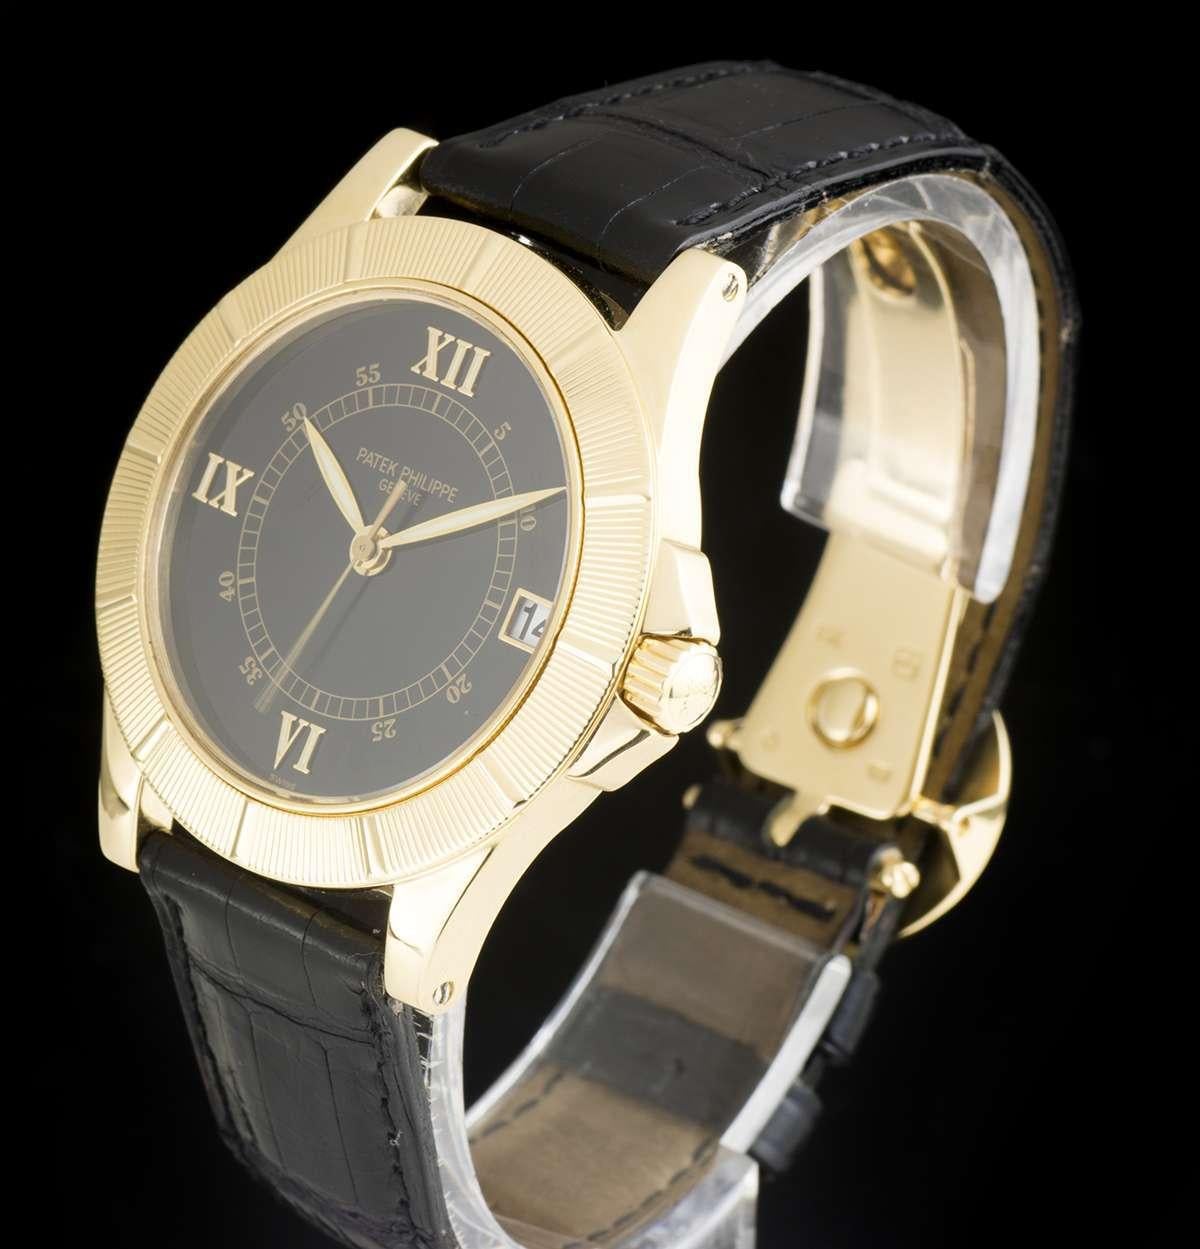 An 18k Yellow Gold Neptune Gents Wristwatch, black dial with applied roman numerals at 3, 6, 9 and 12 0'clock, date at 3 0'clock, a fixed 18k yellow gold bezel, an original black leather strap with an original 18k yellow gold deployant clasp,